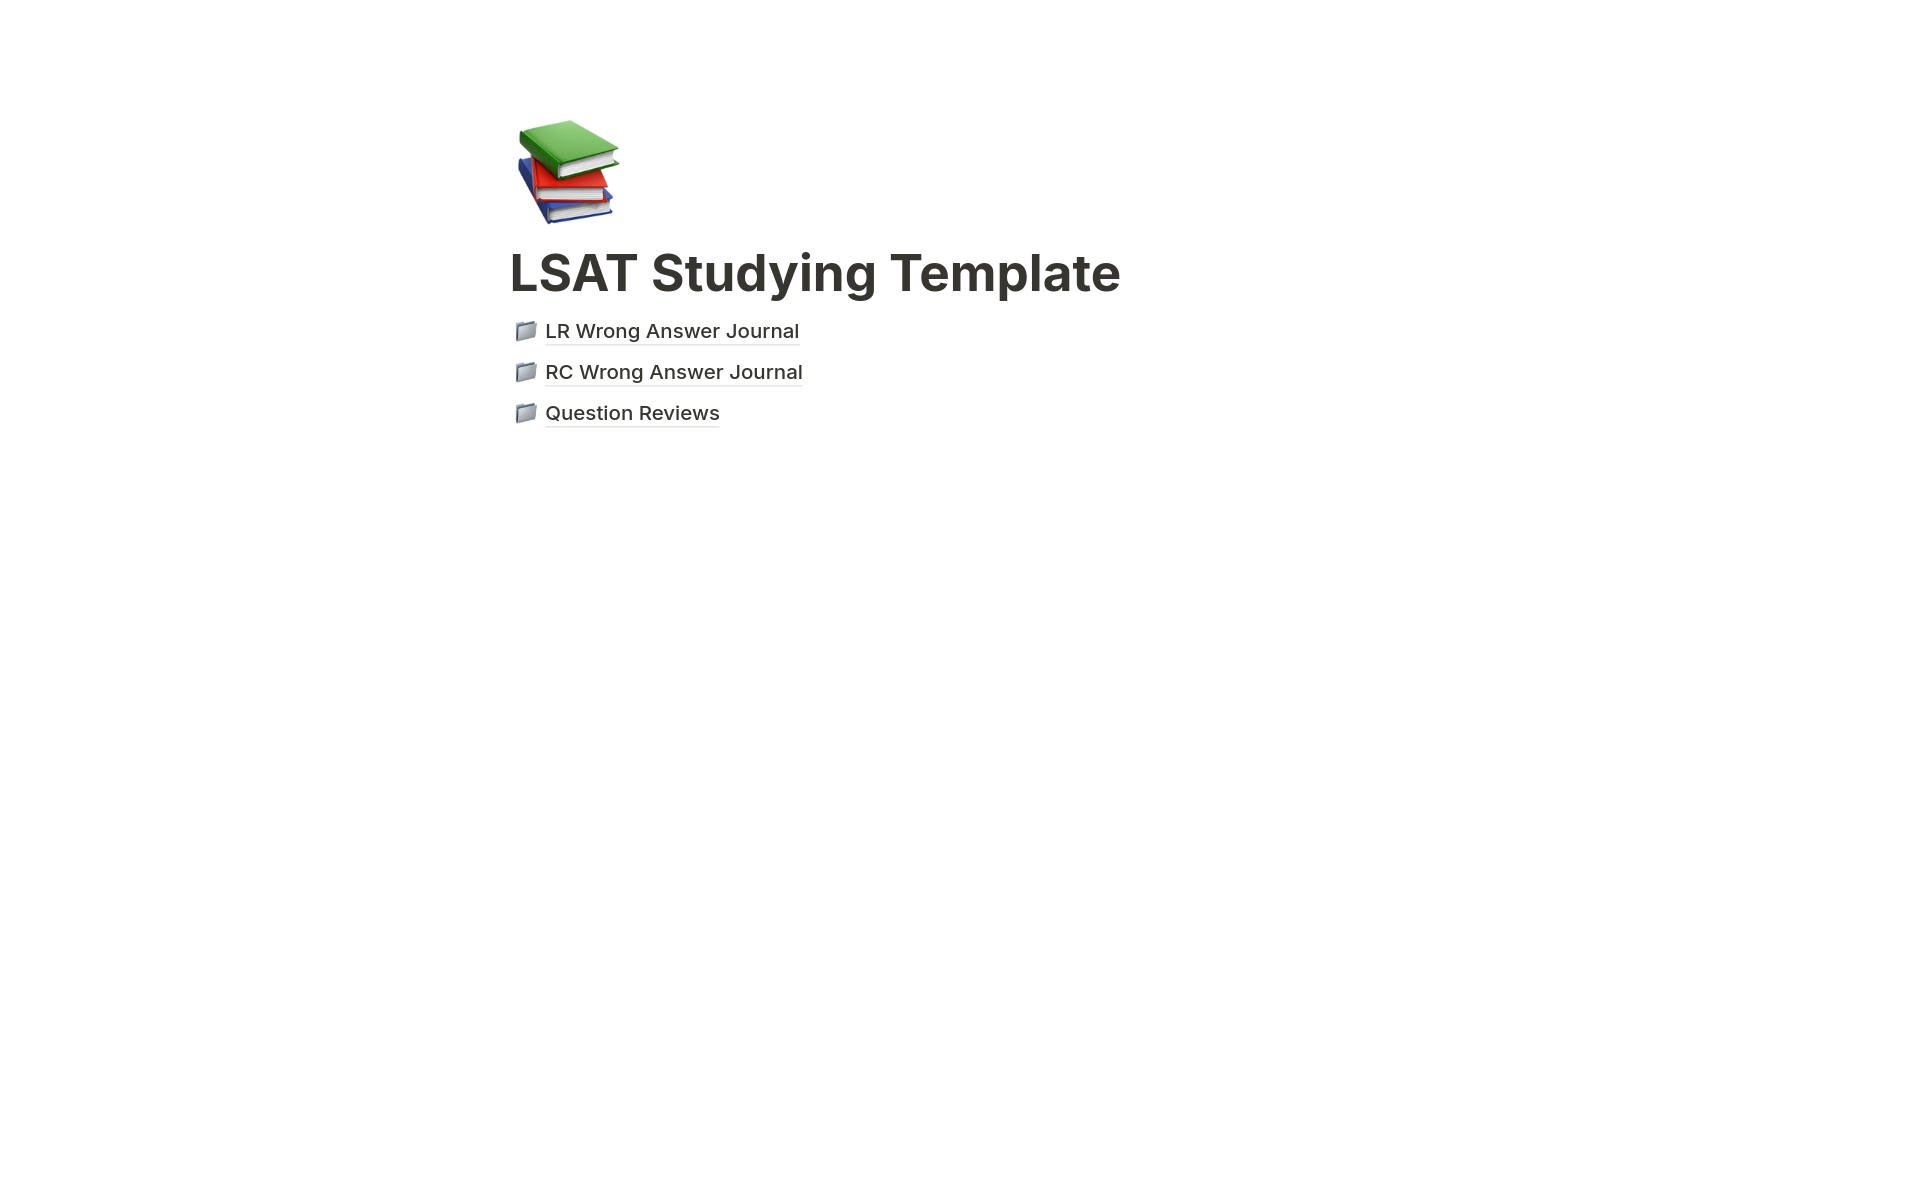 LSAT wrong answer journal I used! 